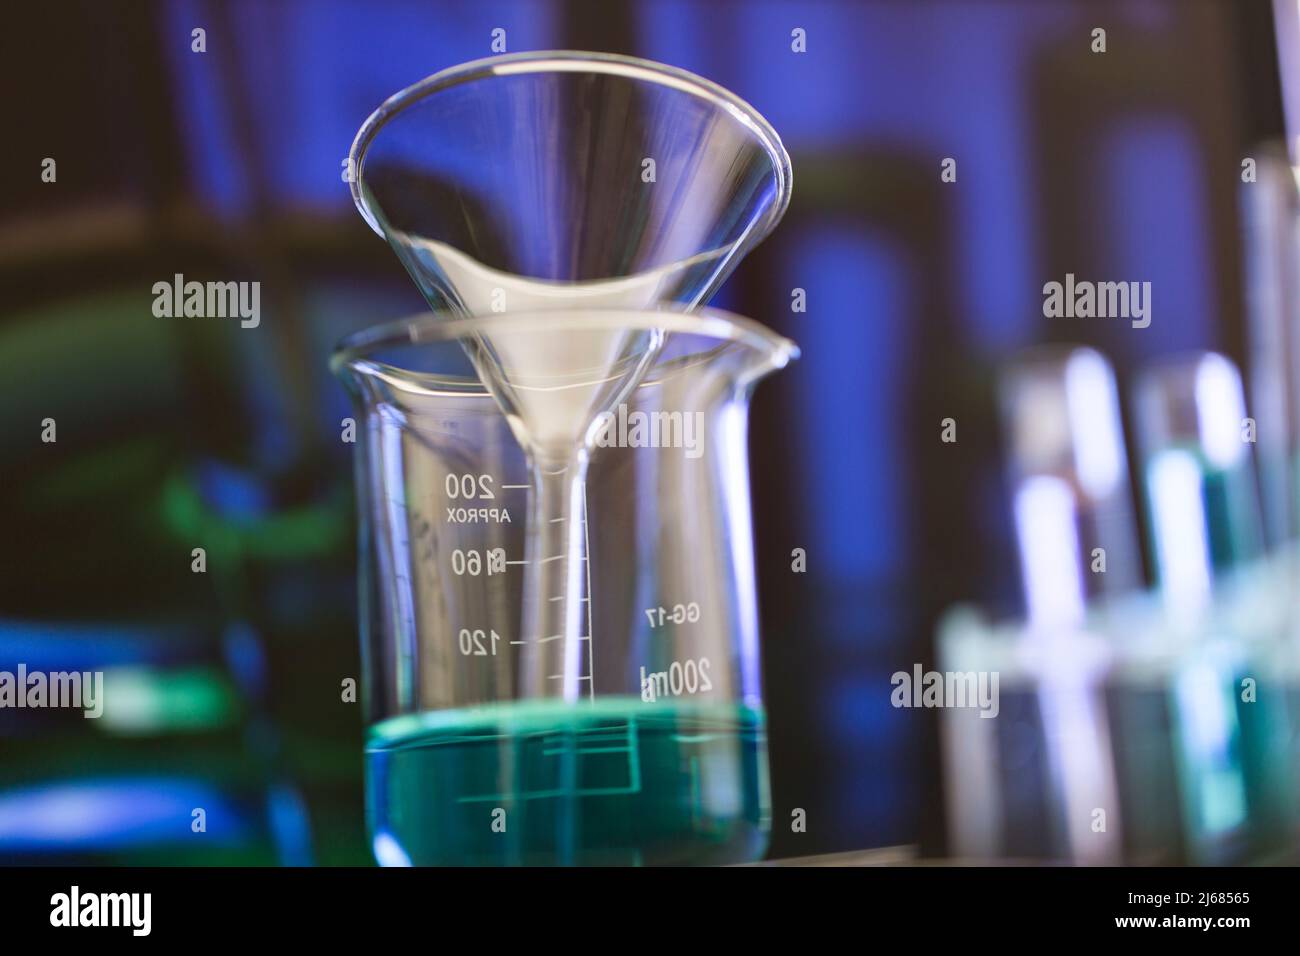 Crystal clear glass funnel in a beaker filled with blue chemical reagent - stock photo Stock Photo